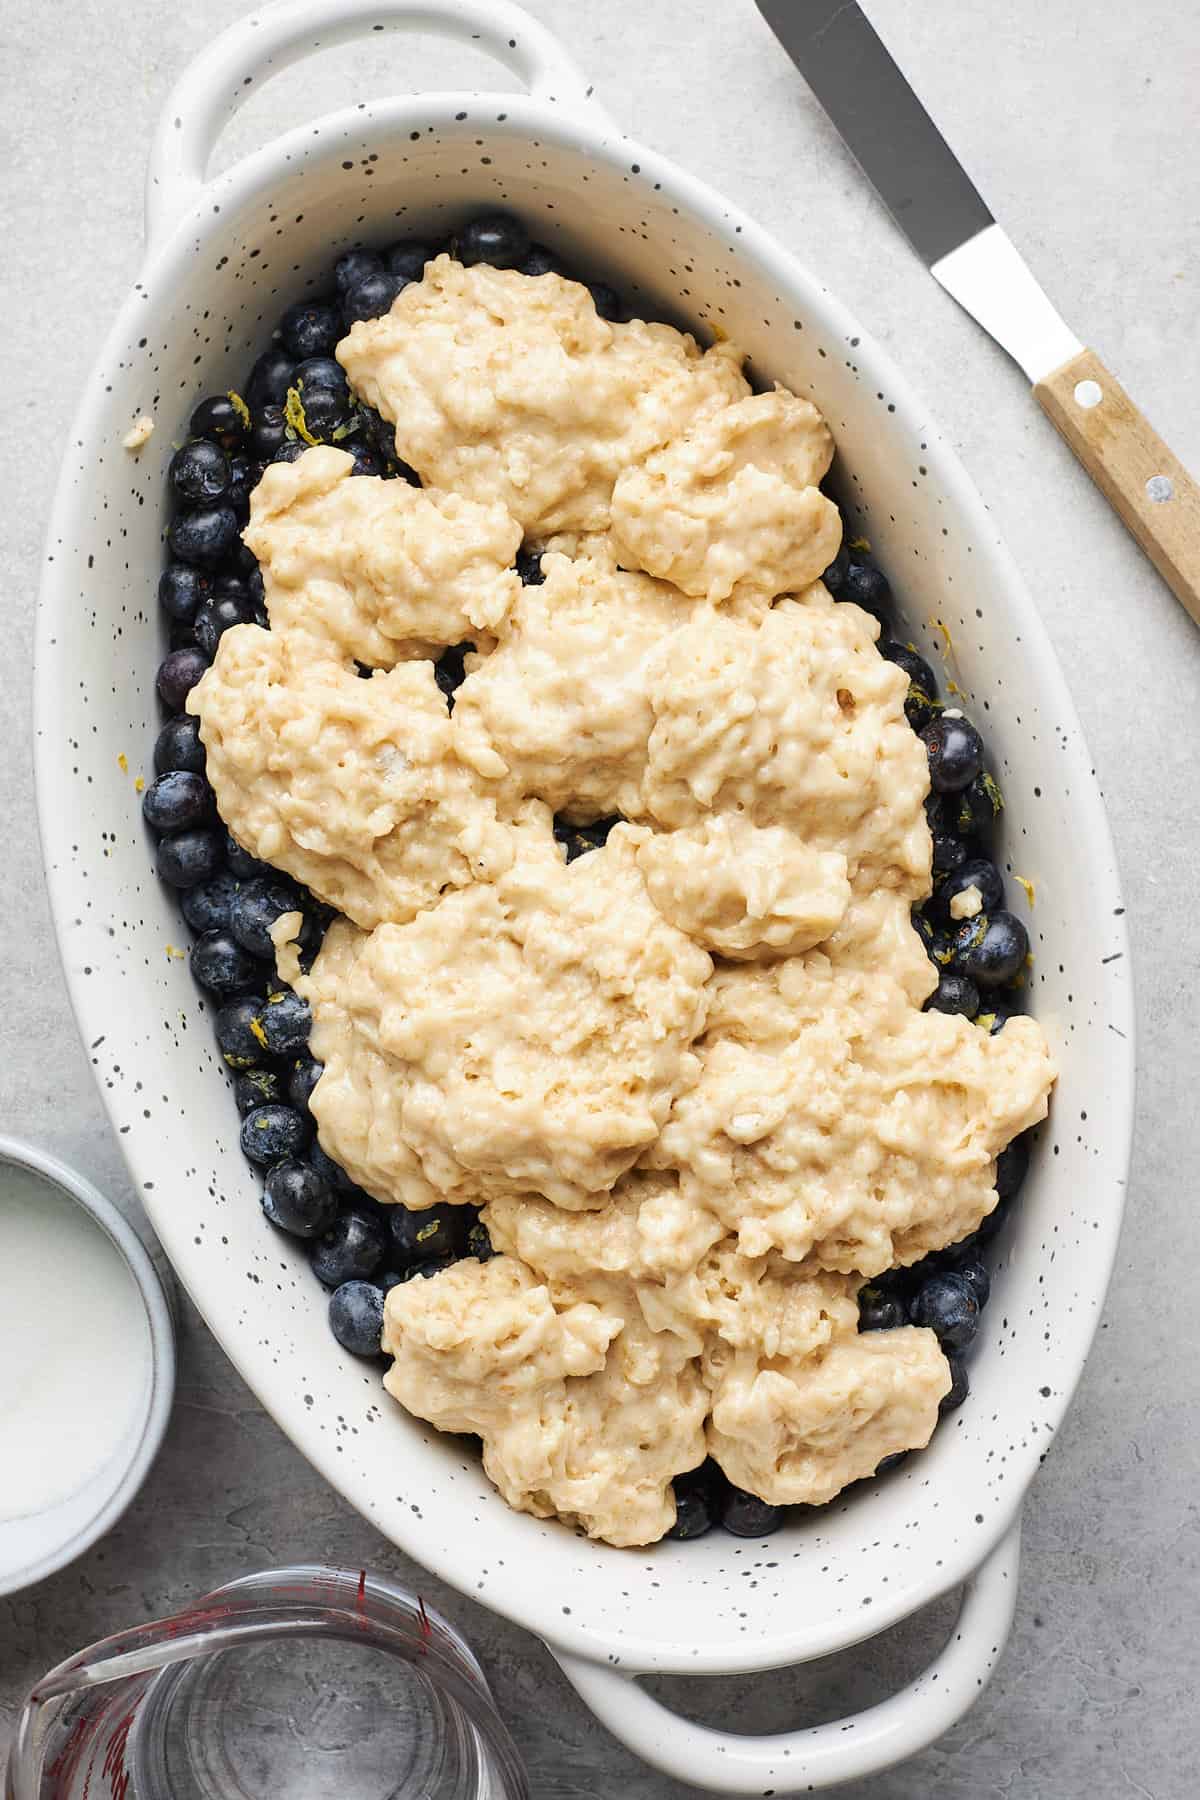 Biscuit dough spread over blueberries in an oval baking dish.